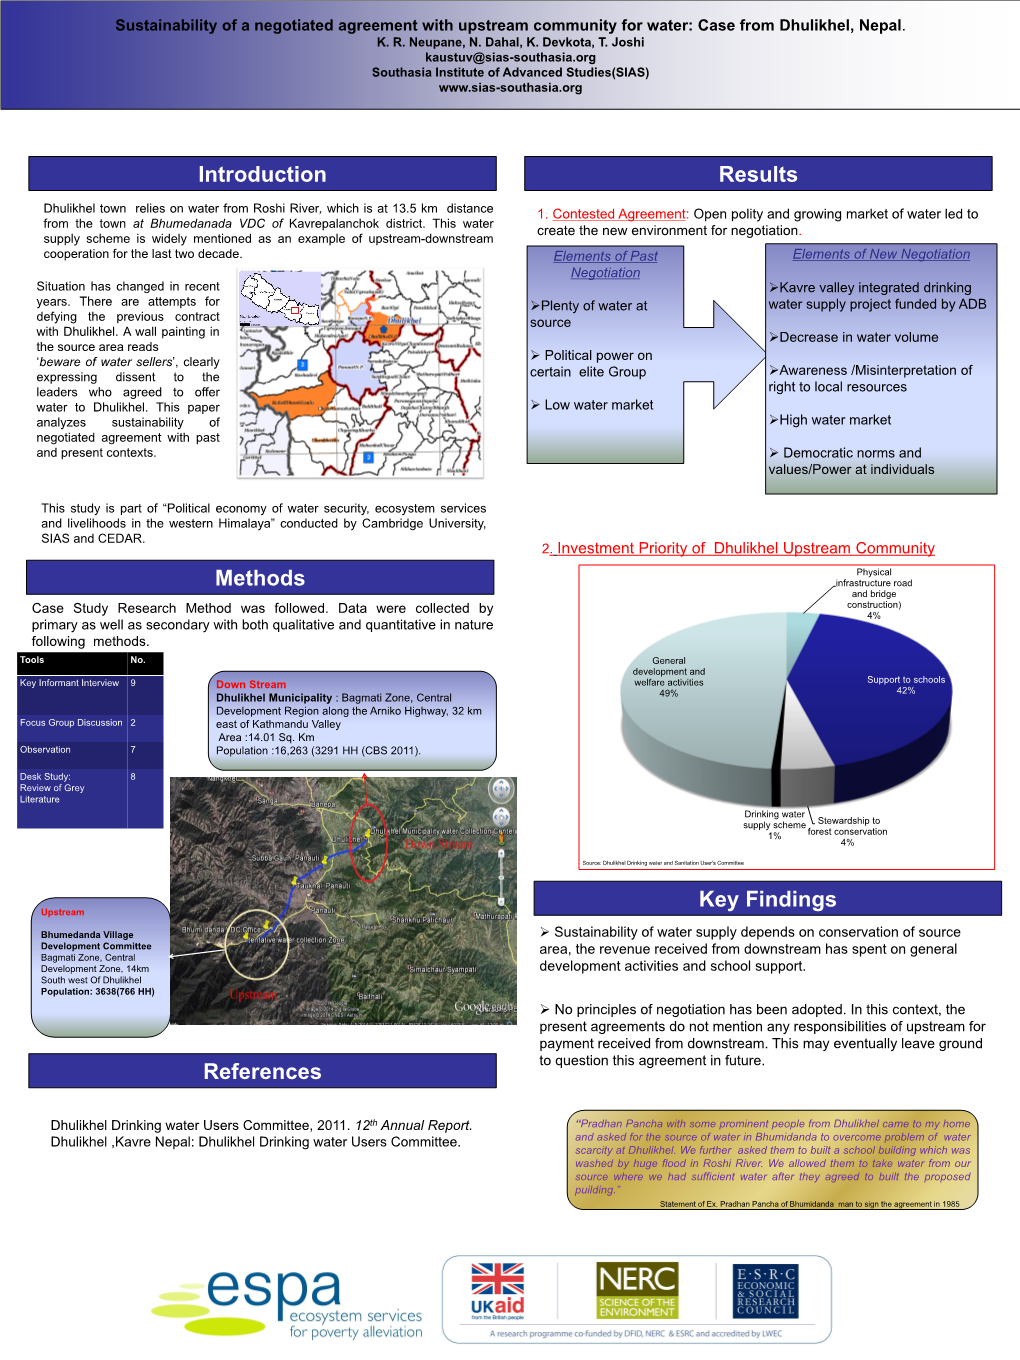 Powerpoint Template for a Scientific Poster